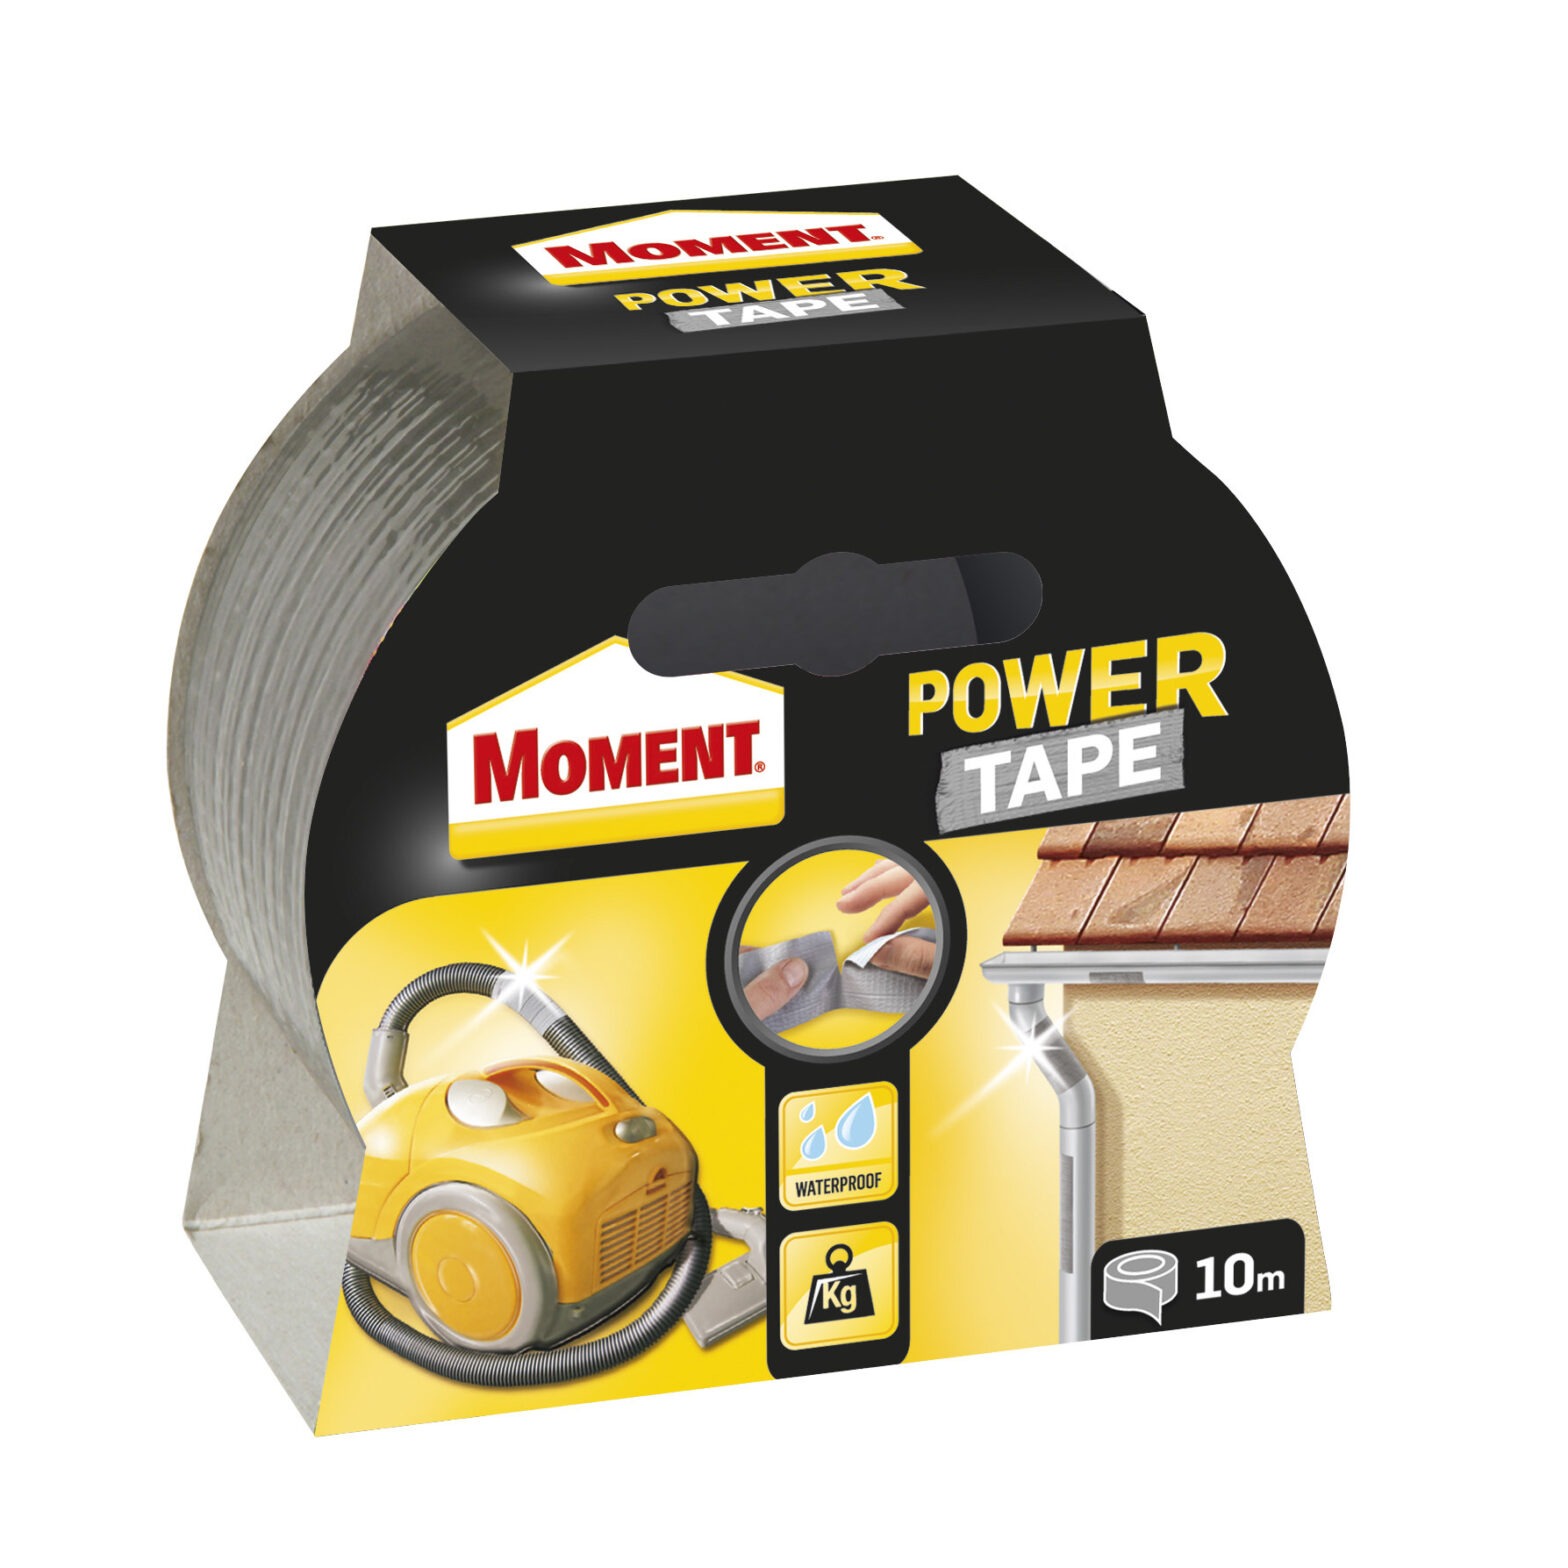 TEIP MOMENT POWER TAPE 10M SILVER